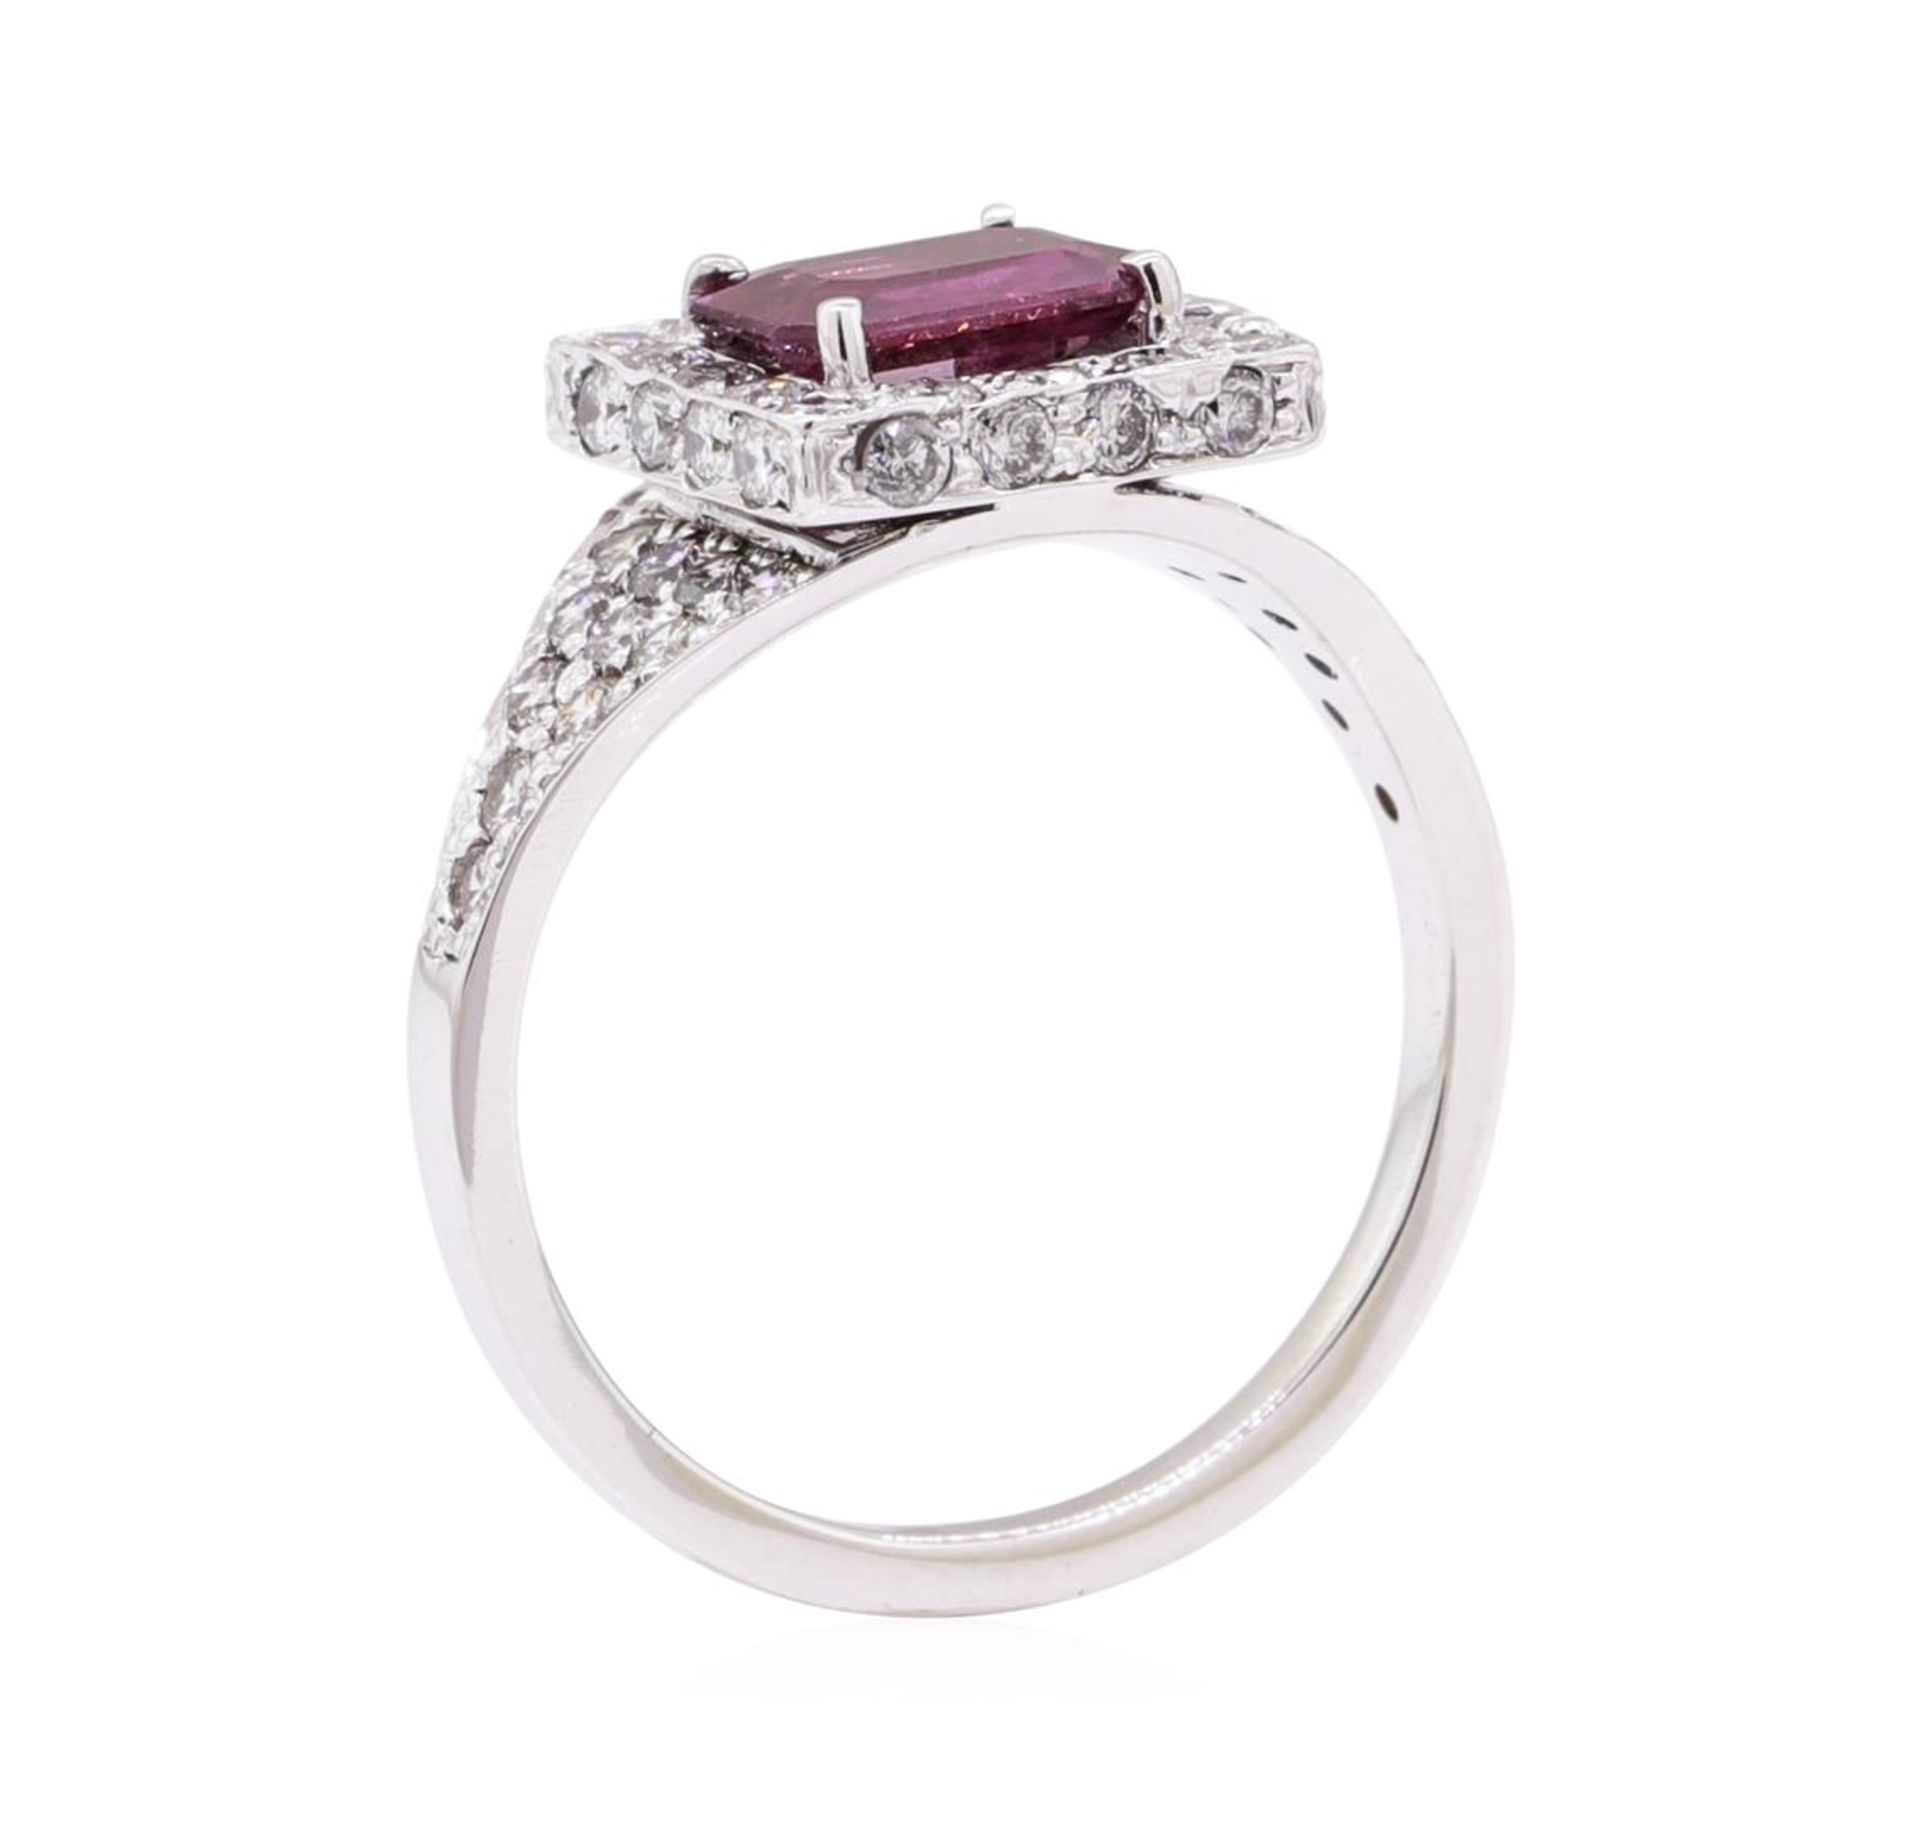 2.02 ctw Ruby And Diamond Ring - 14KT White Gold - Image 4 of 5